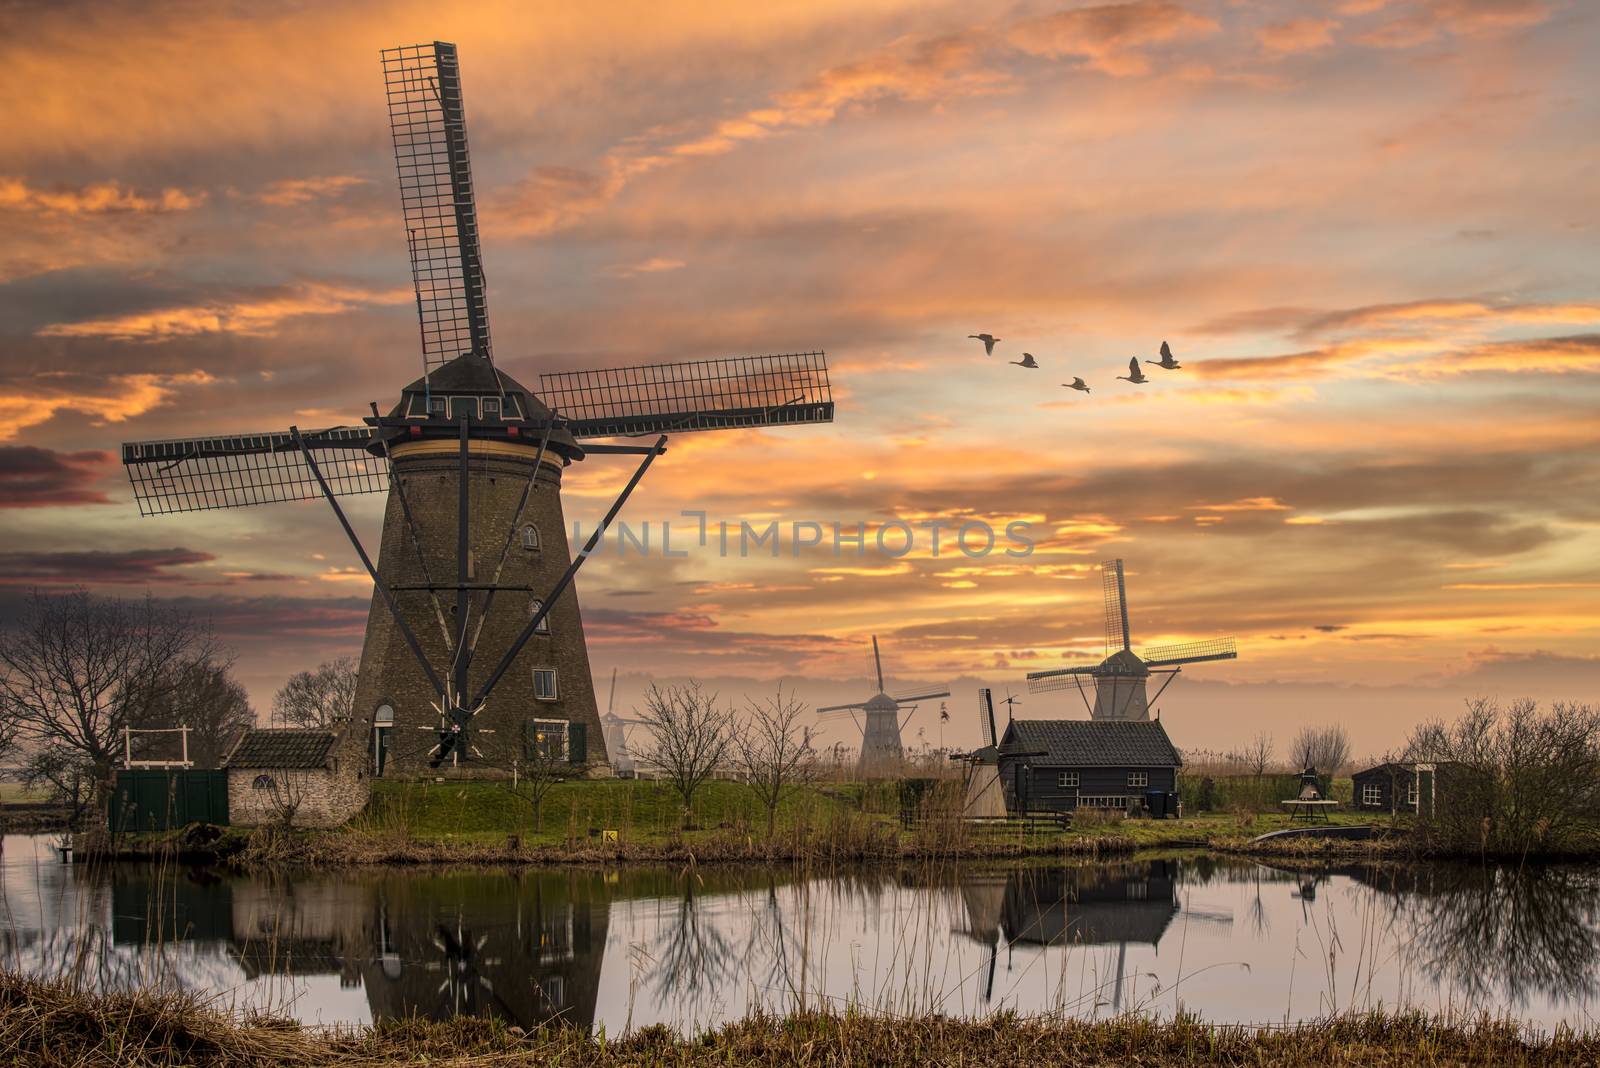 Group of geese flying above the Dutch windmills during the sunset moment